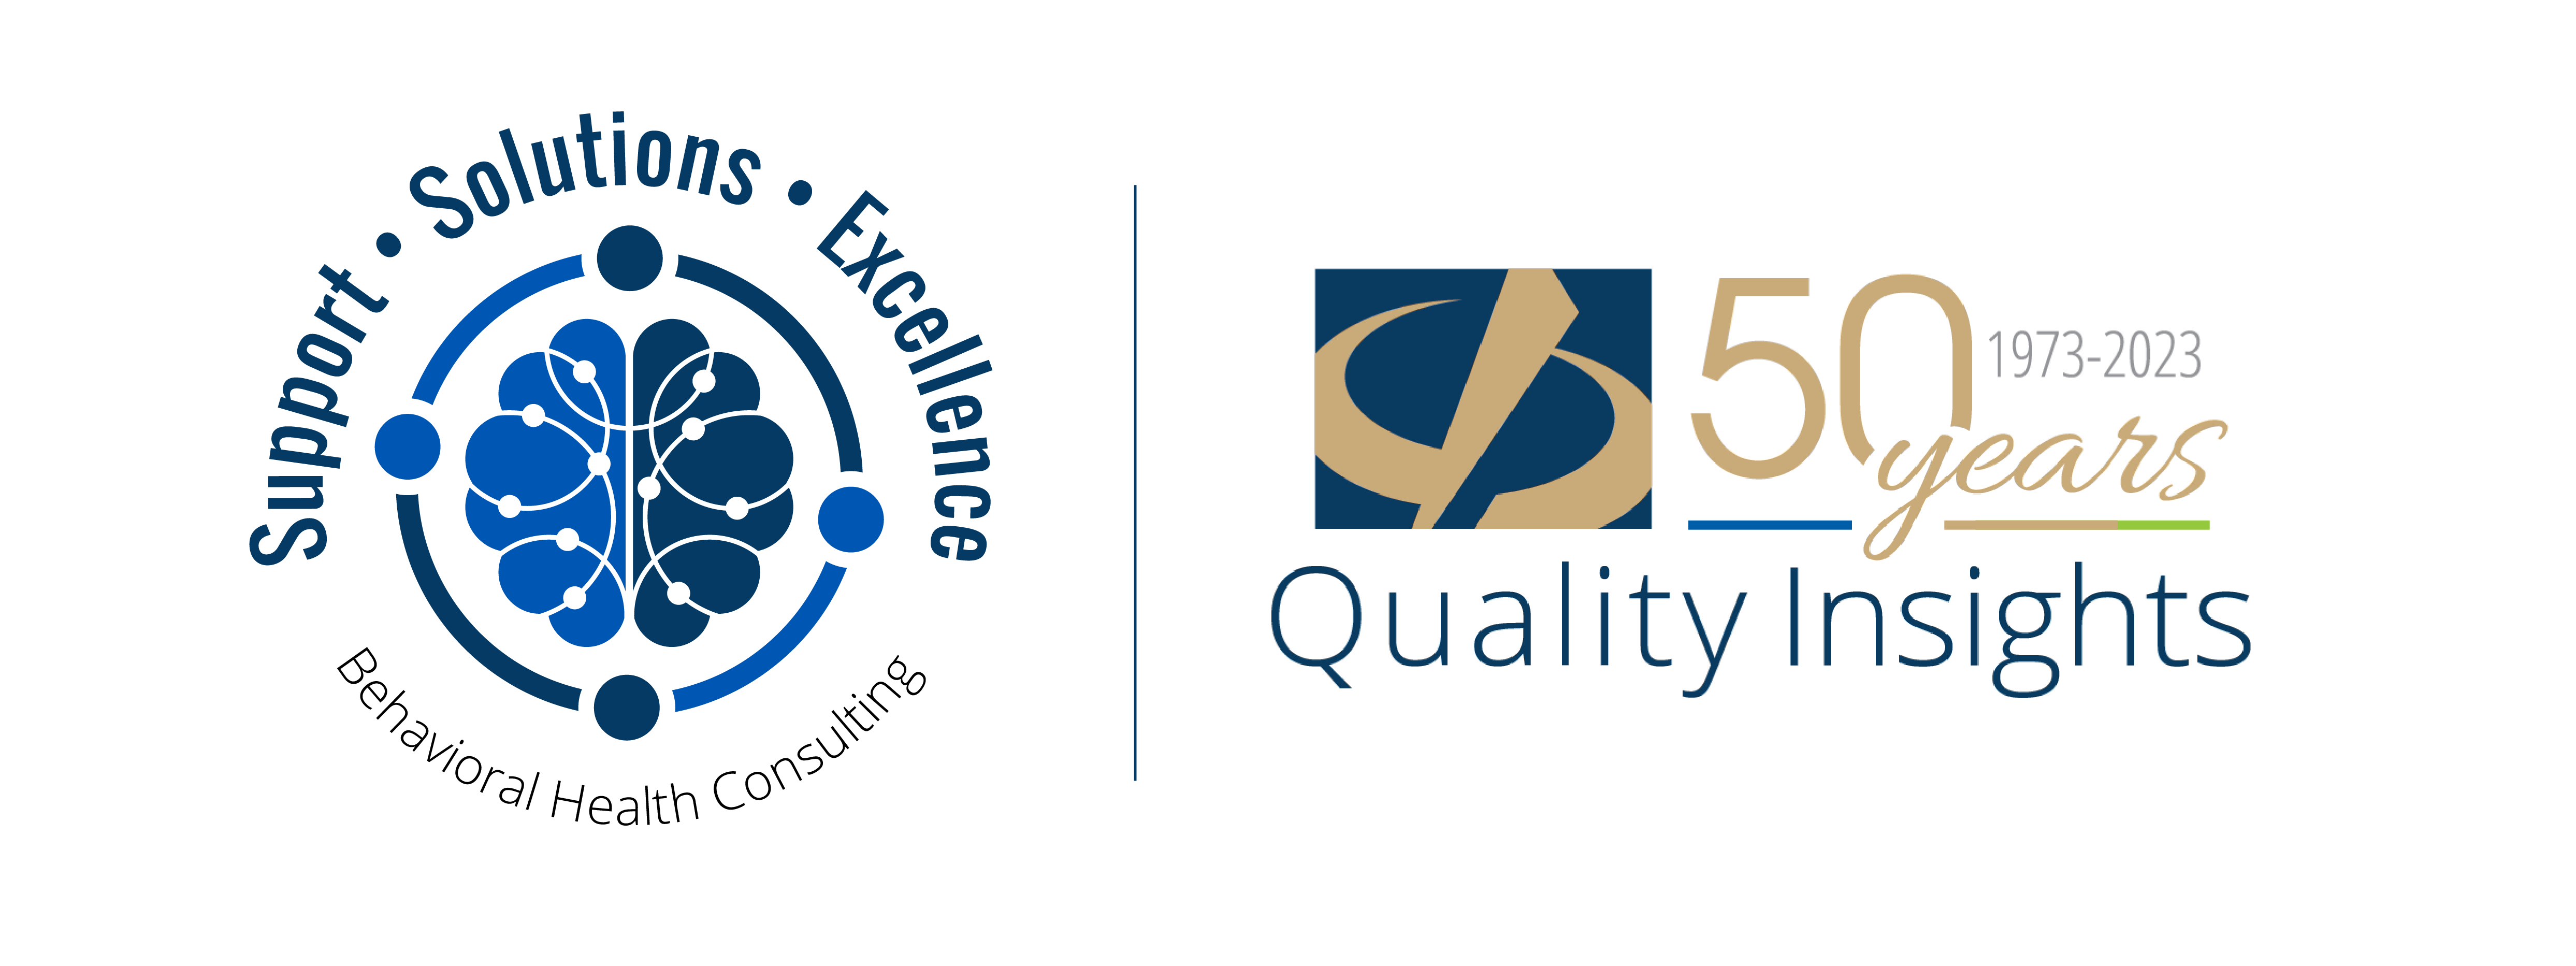 CCBHC and Quality Insights 50th Anniversary Logo